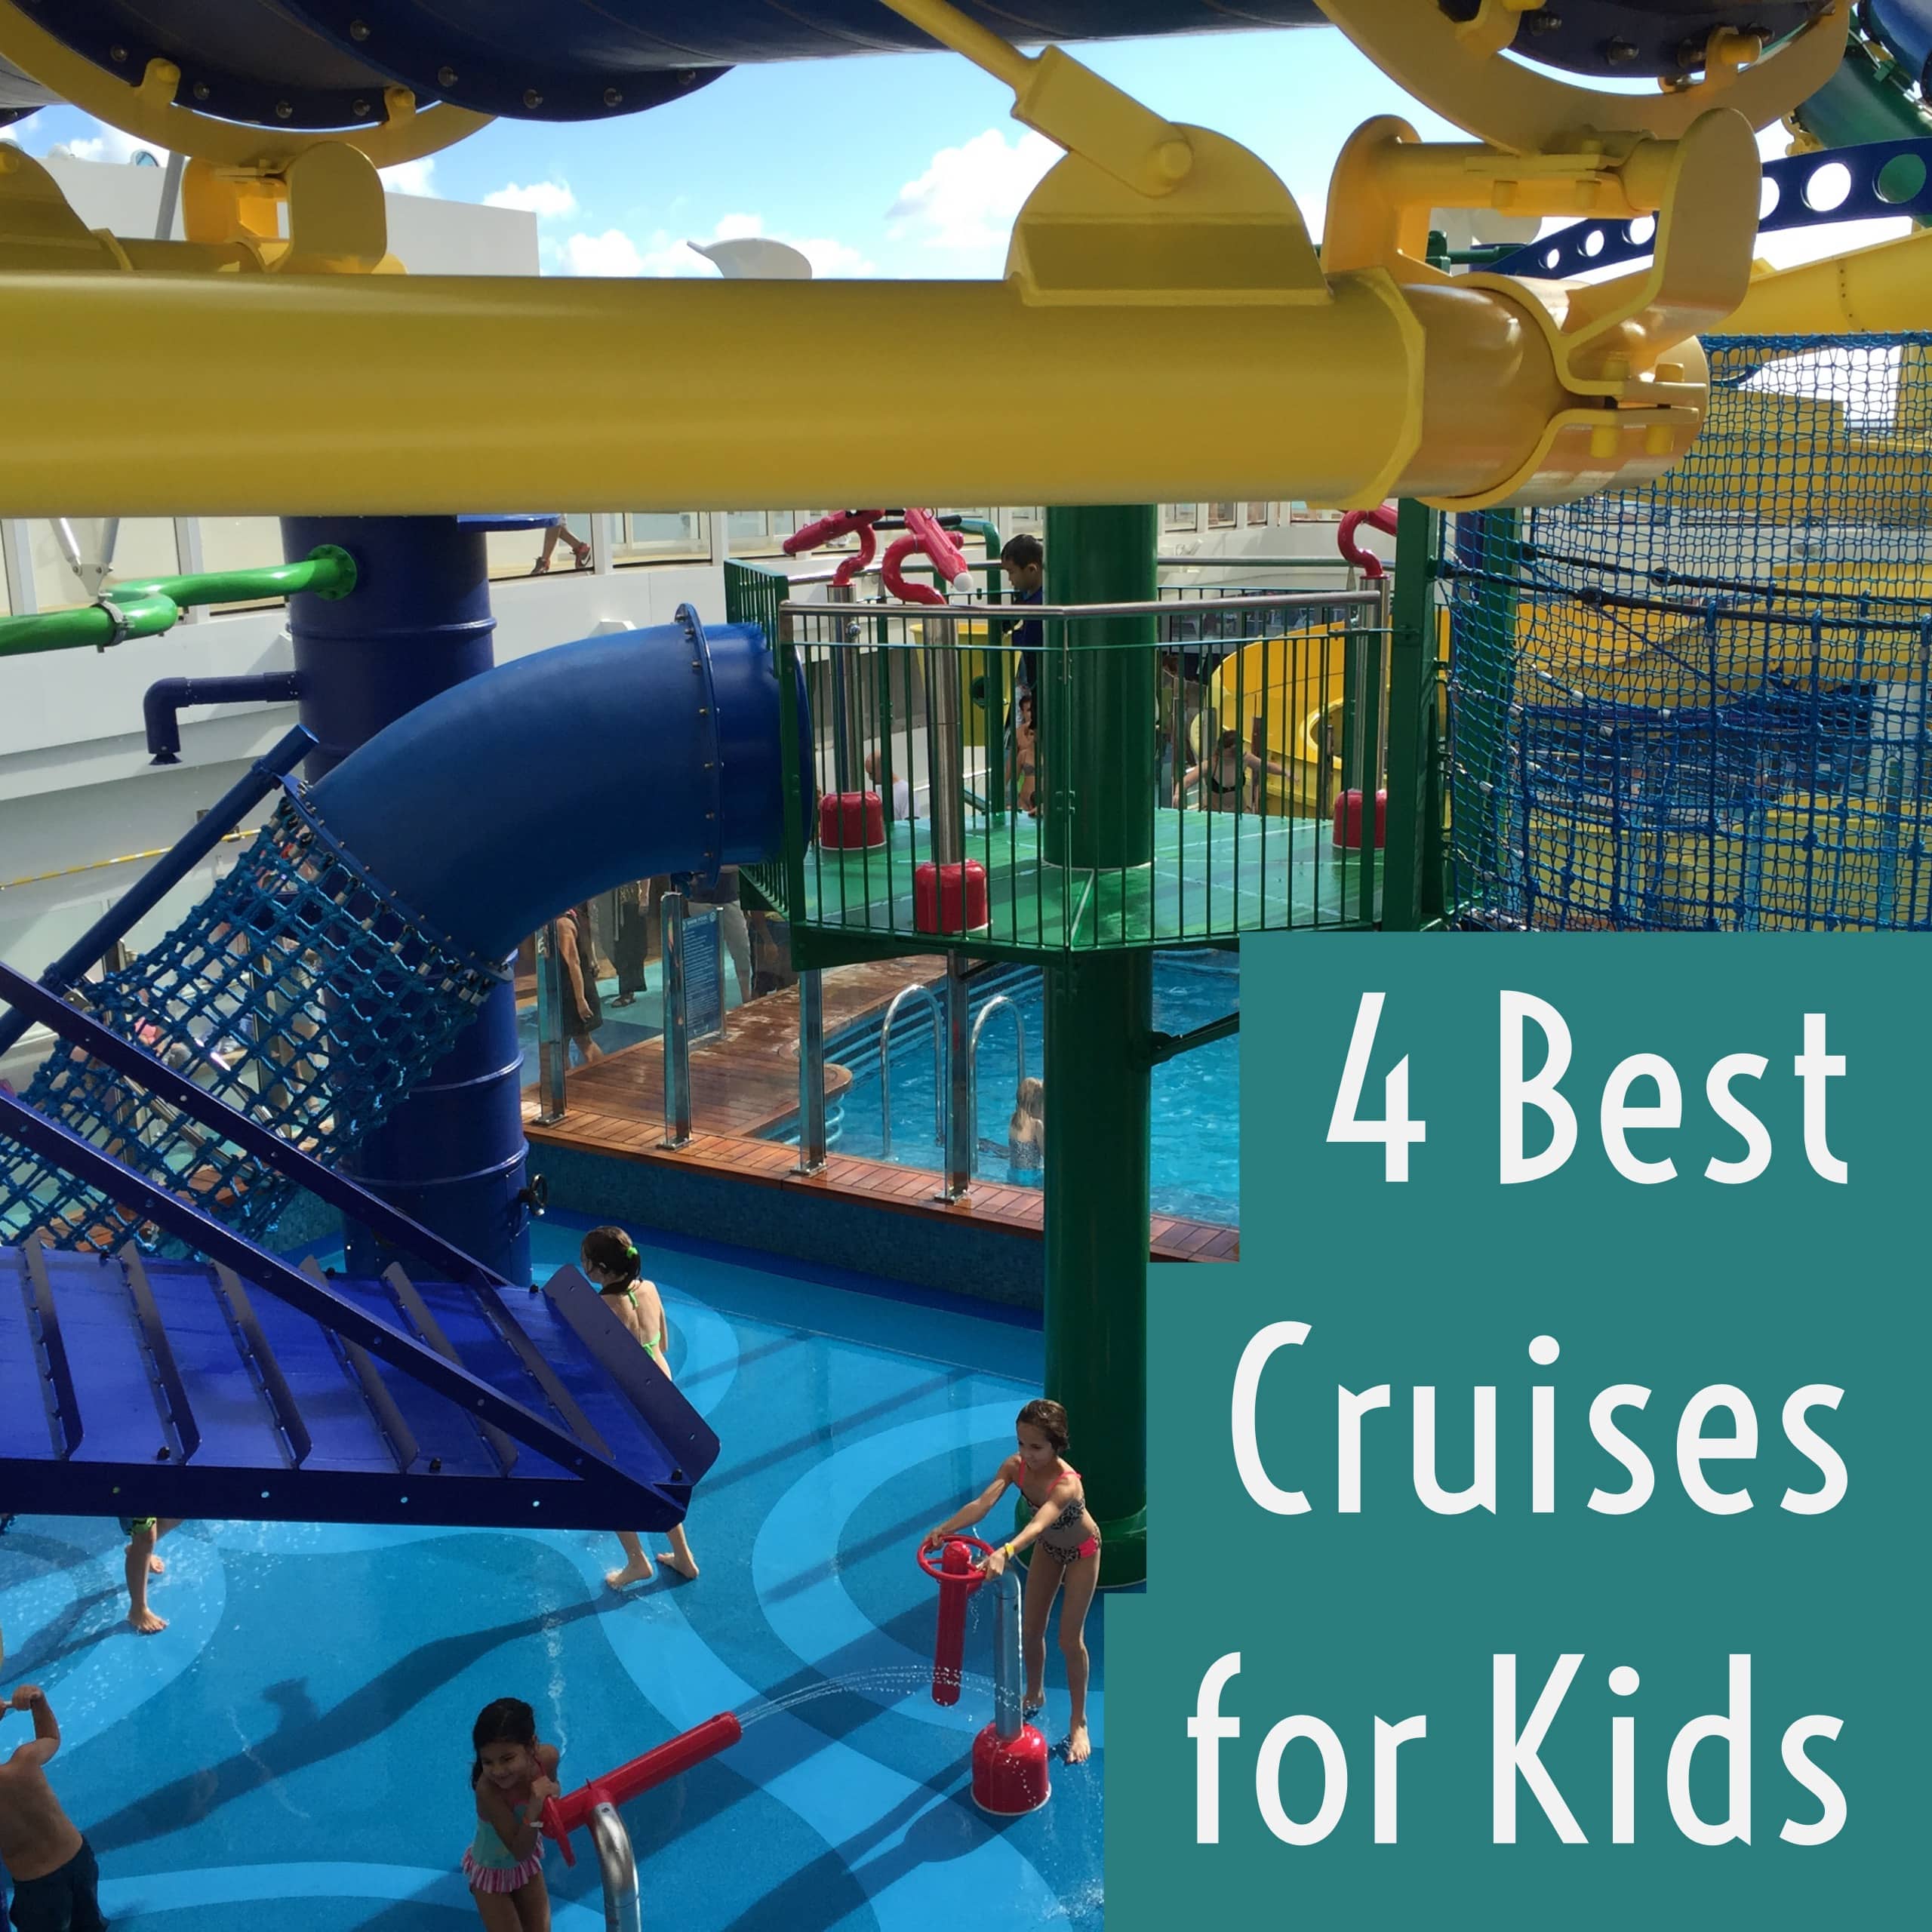 Best Cruises for Kids: 4 Cruise Lines Kids Will Love